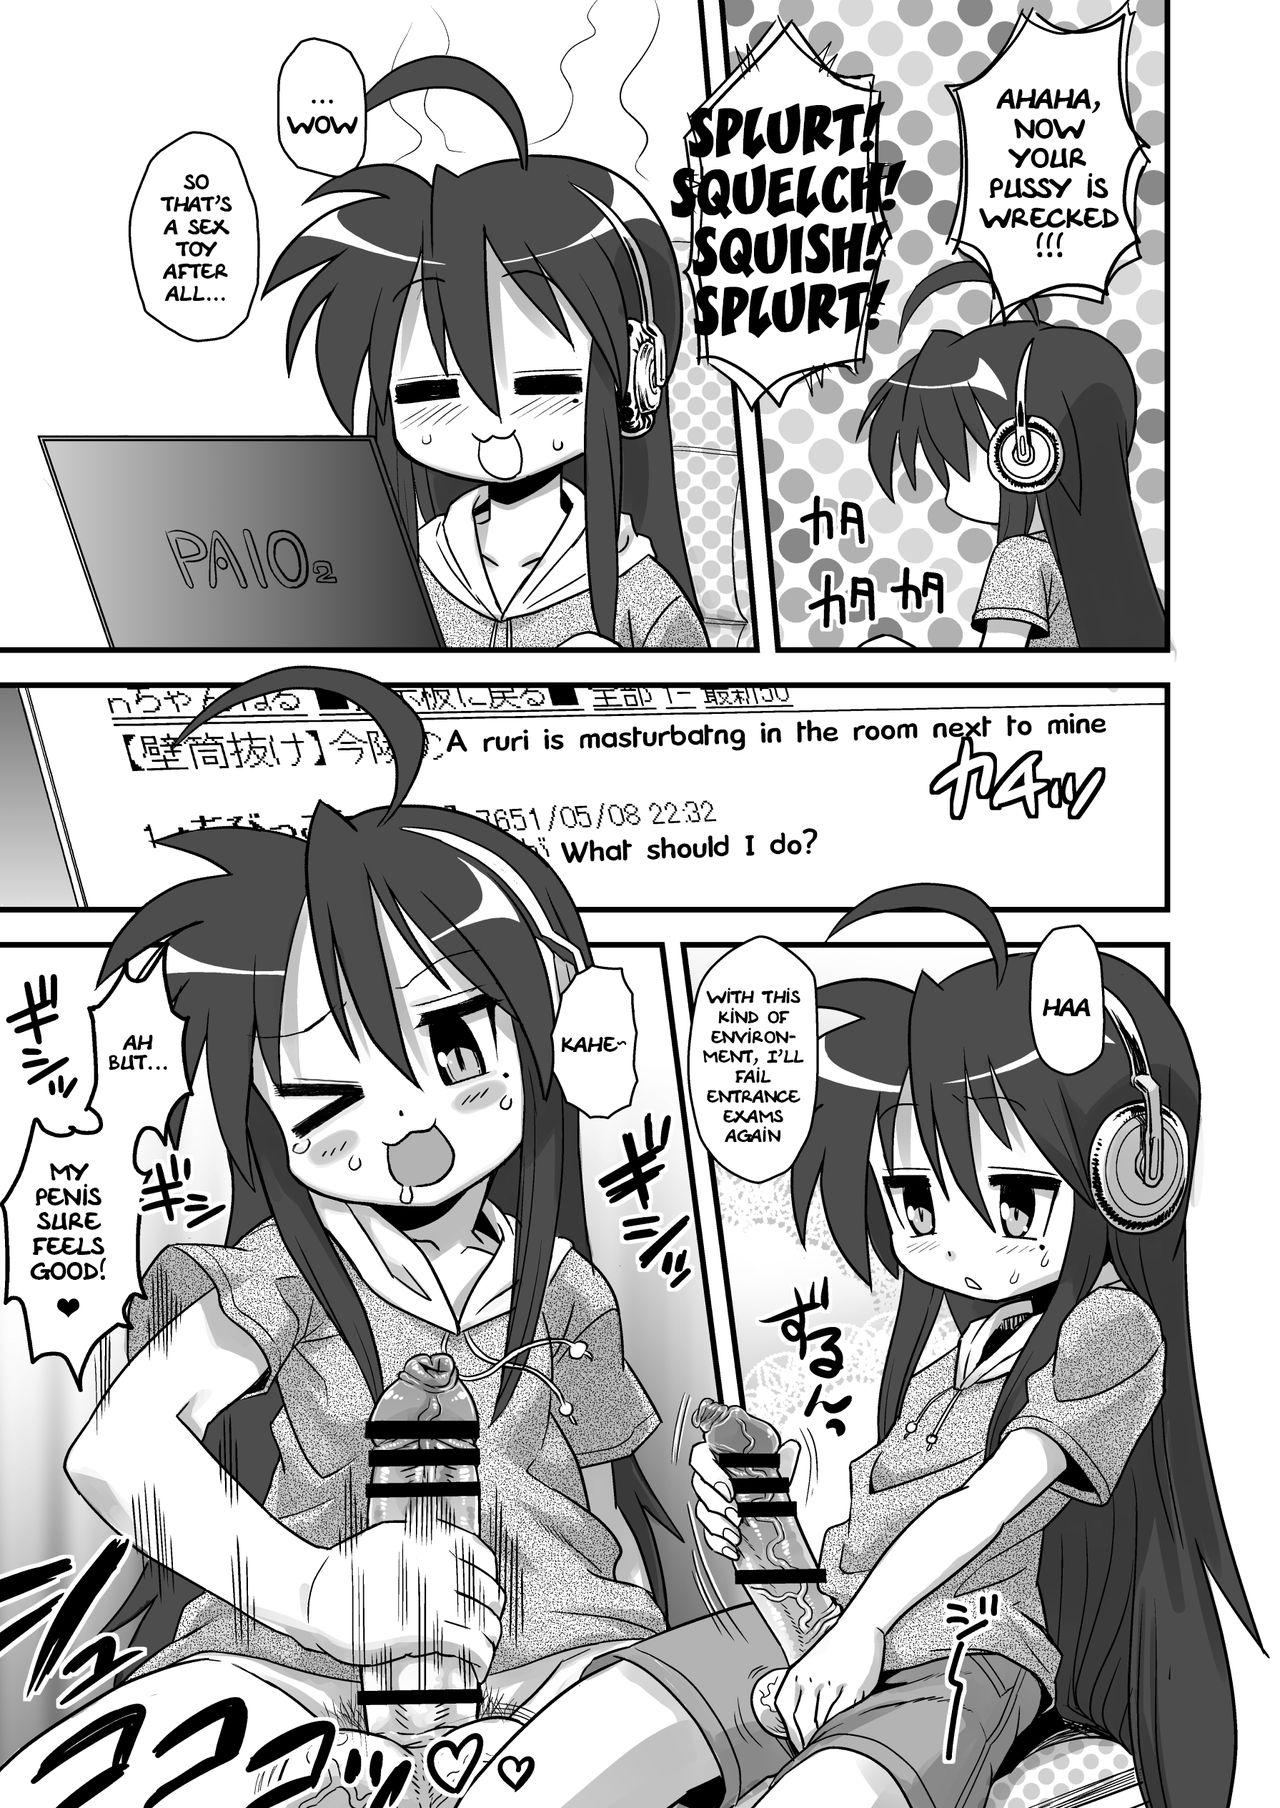 Married SEXSPHERE ORGANELLE - Lucky star Martian successor nadesico Hokenshitsu no shinigami 3some - Page 11